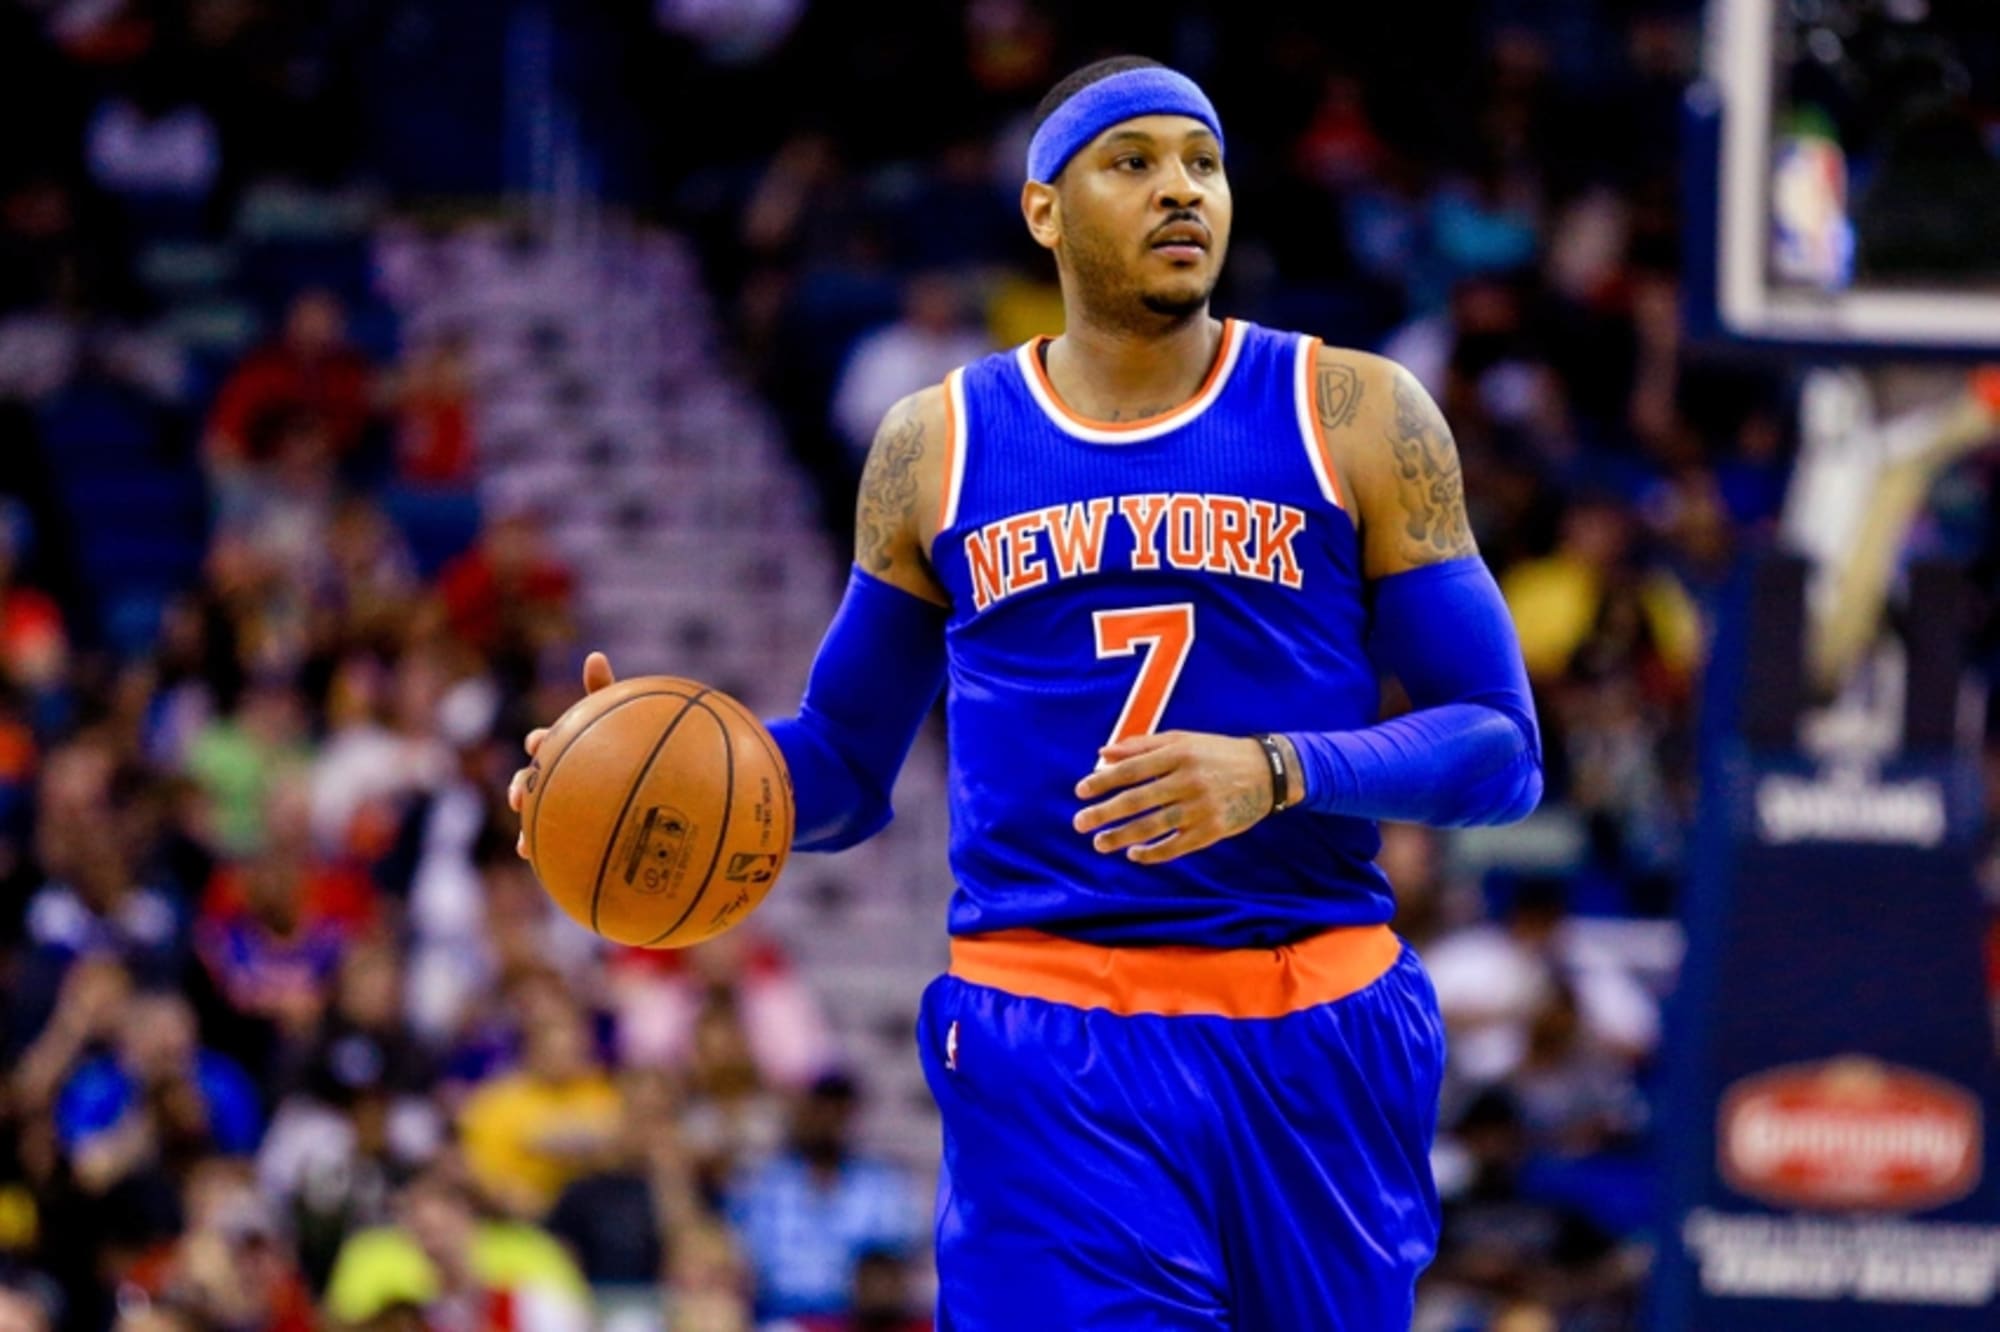 Cleveland Cavaliers: Could Carmelo Anthony Be The Answer?